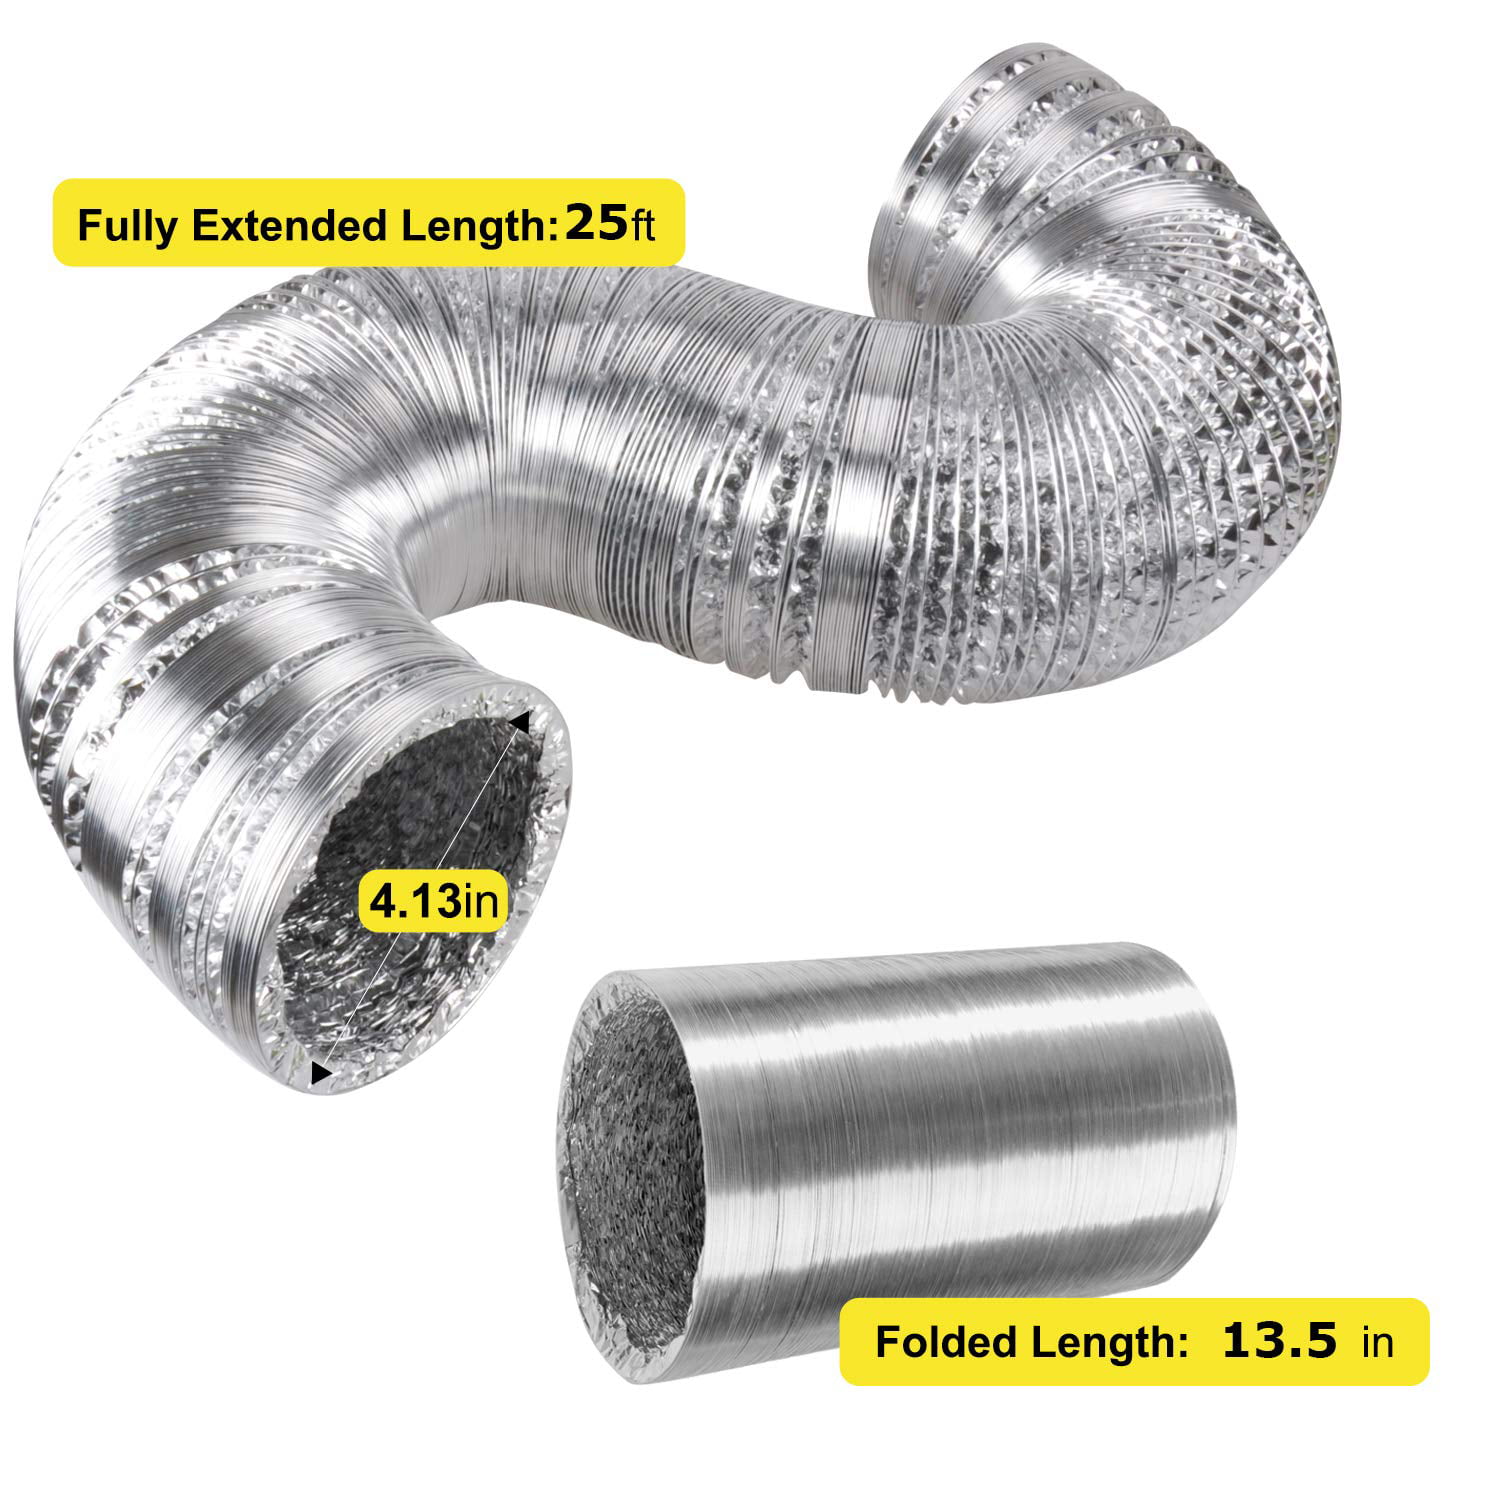 Flexible Non-Insulated Air Pipe Details about   Aluminum Ducting Dryer Vent Hose 4" Inch, 8FT 